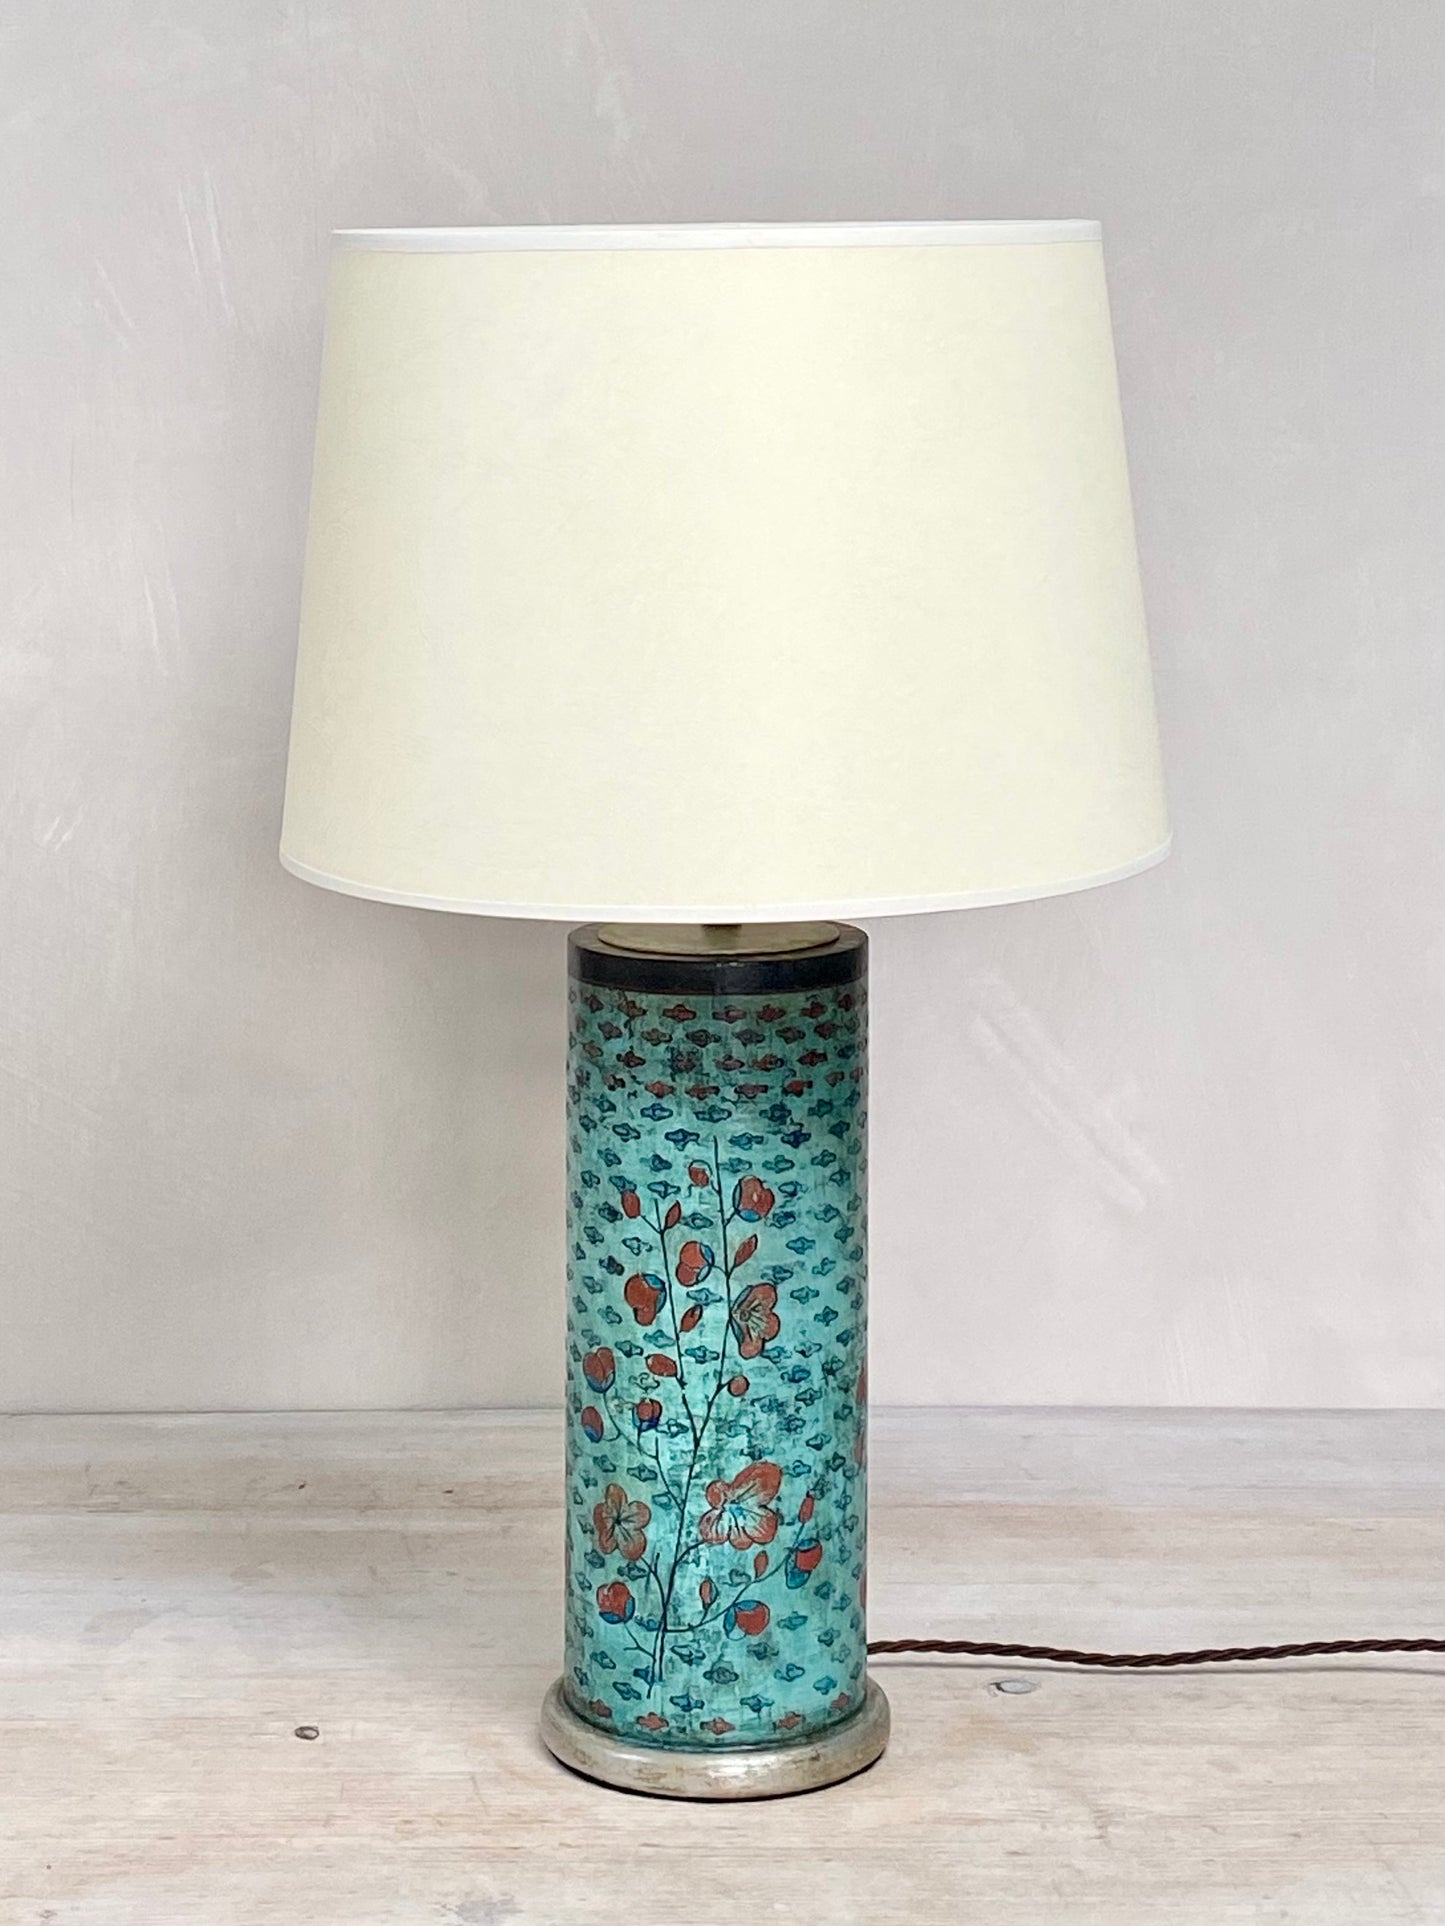 Original Drum Lamp Base, Glossy Gesso Finish, Teal and Red Ochre